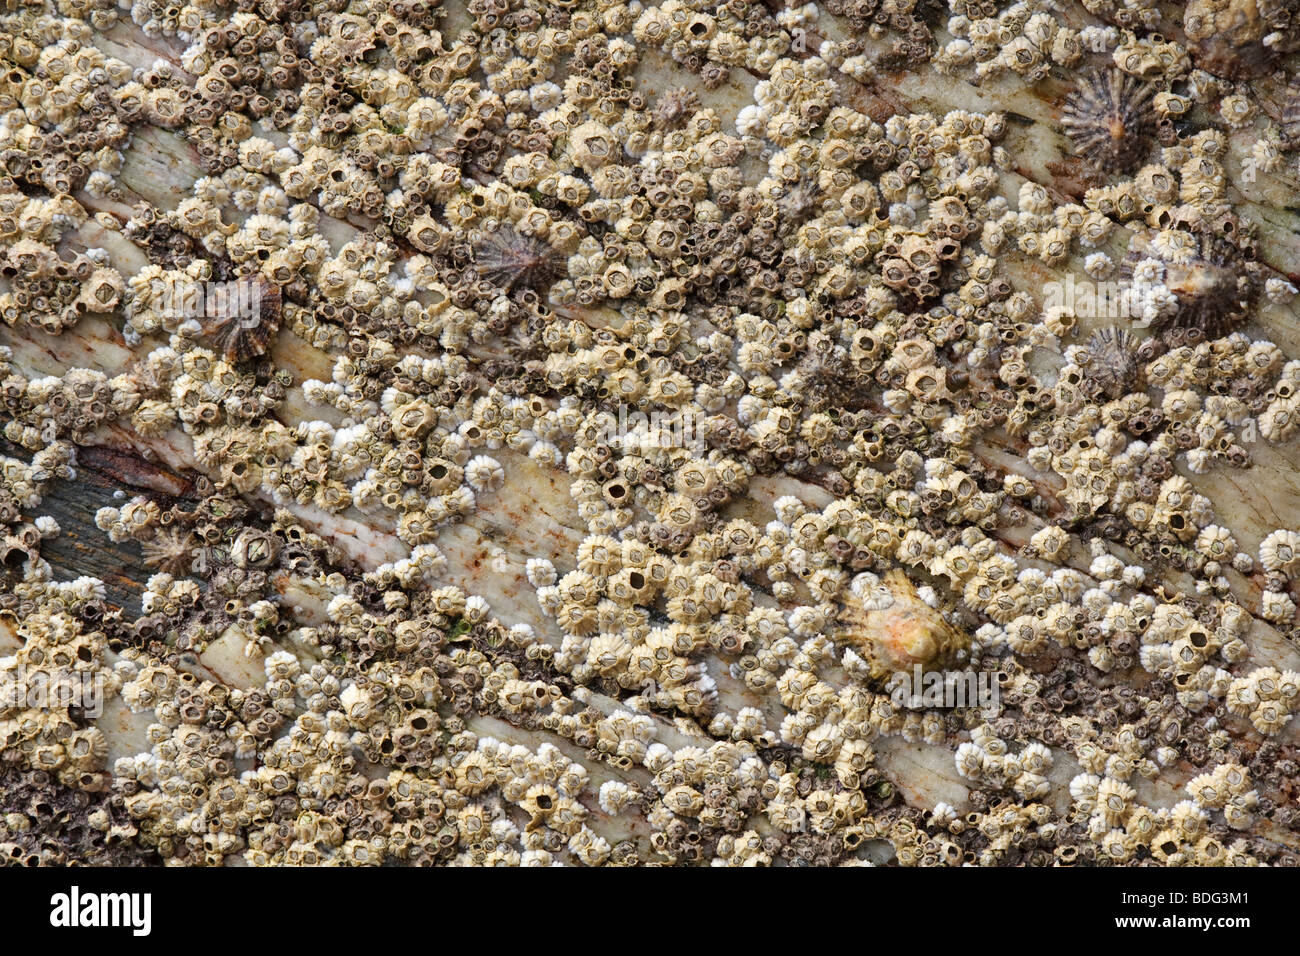 Barnacles and limpets on rock Stock Photo